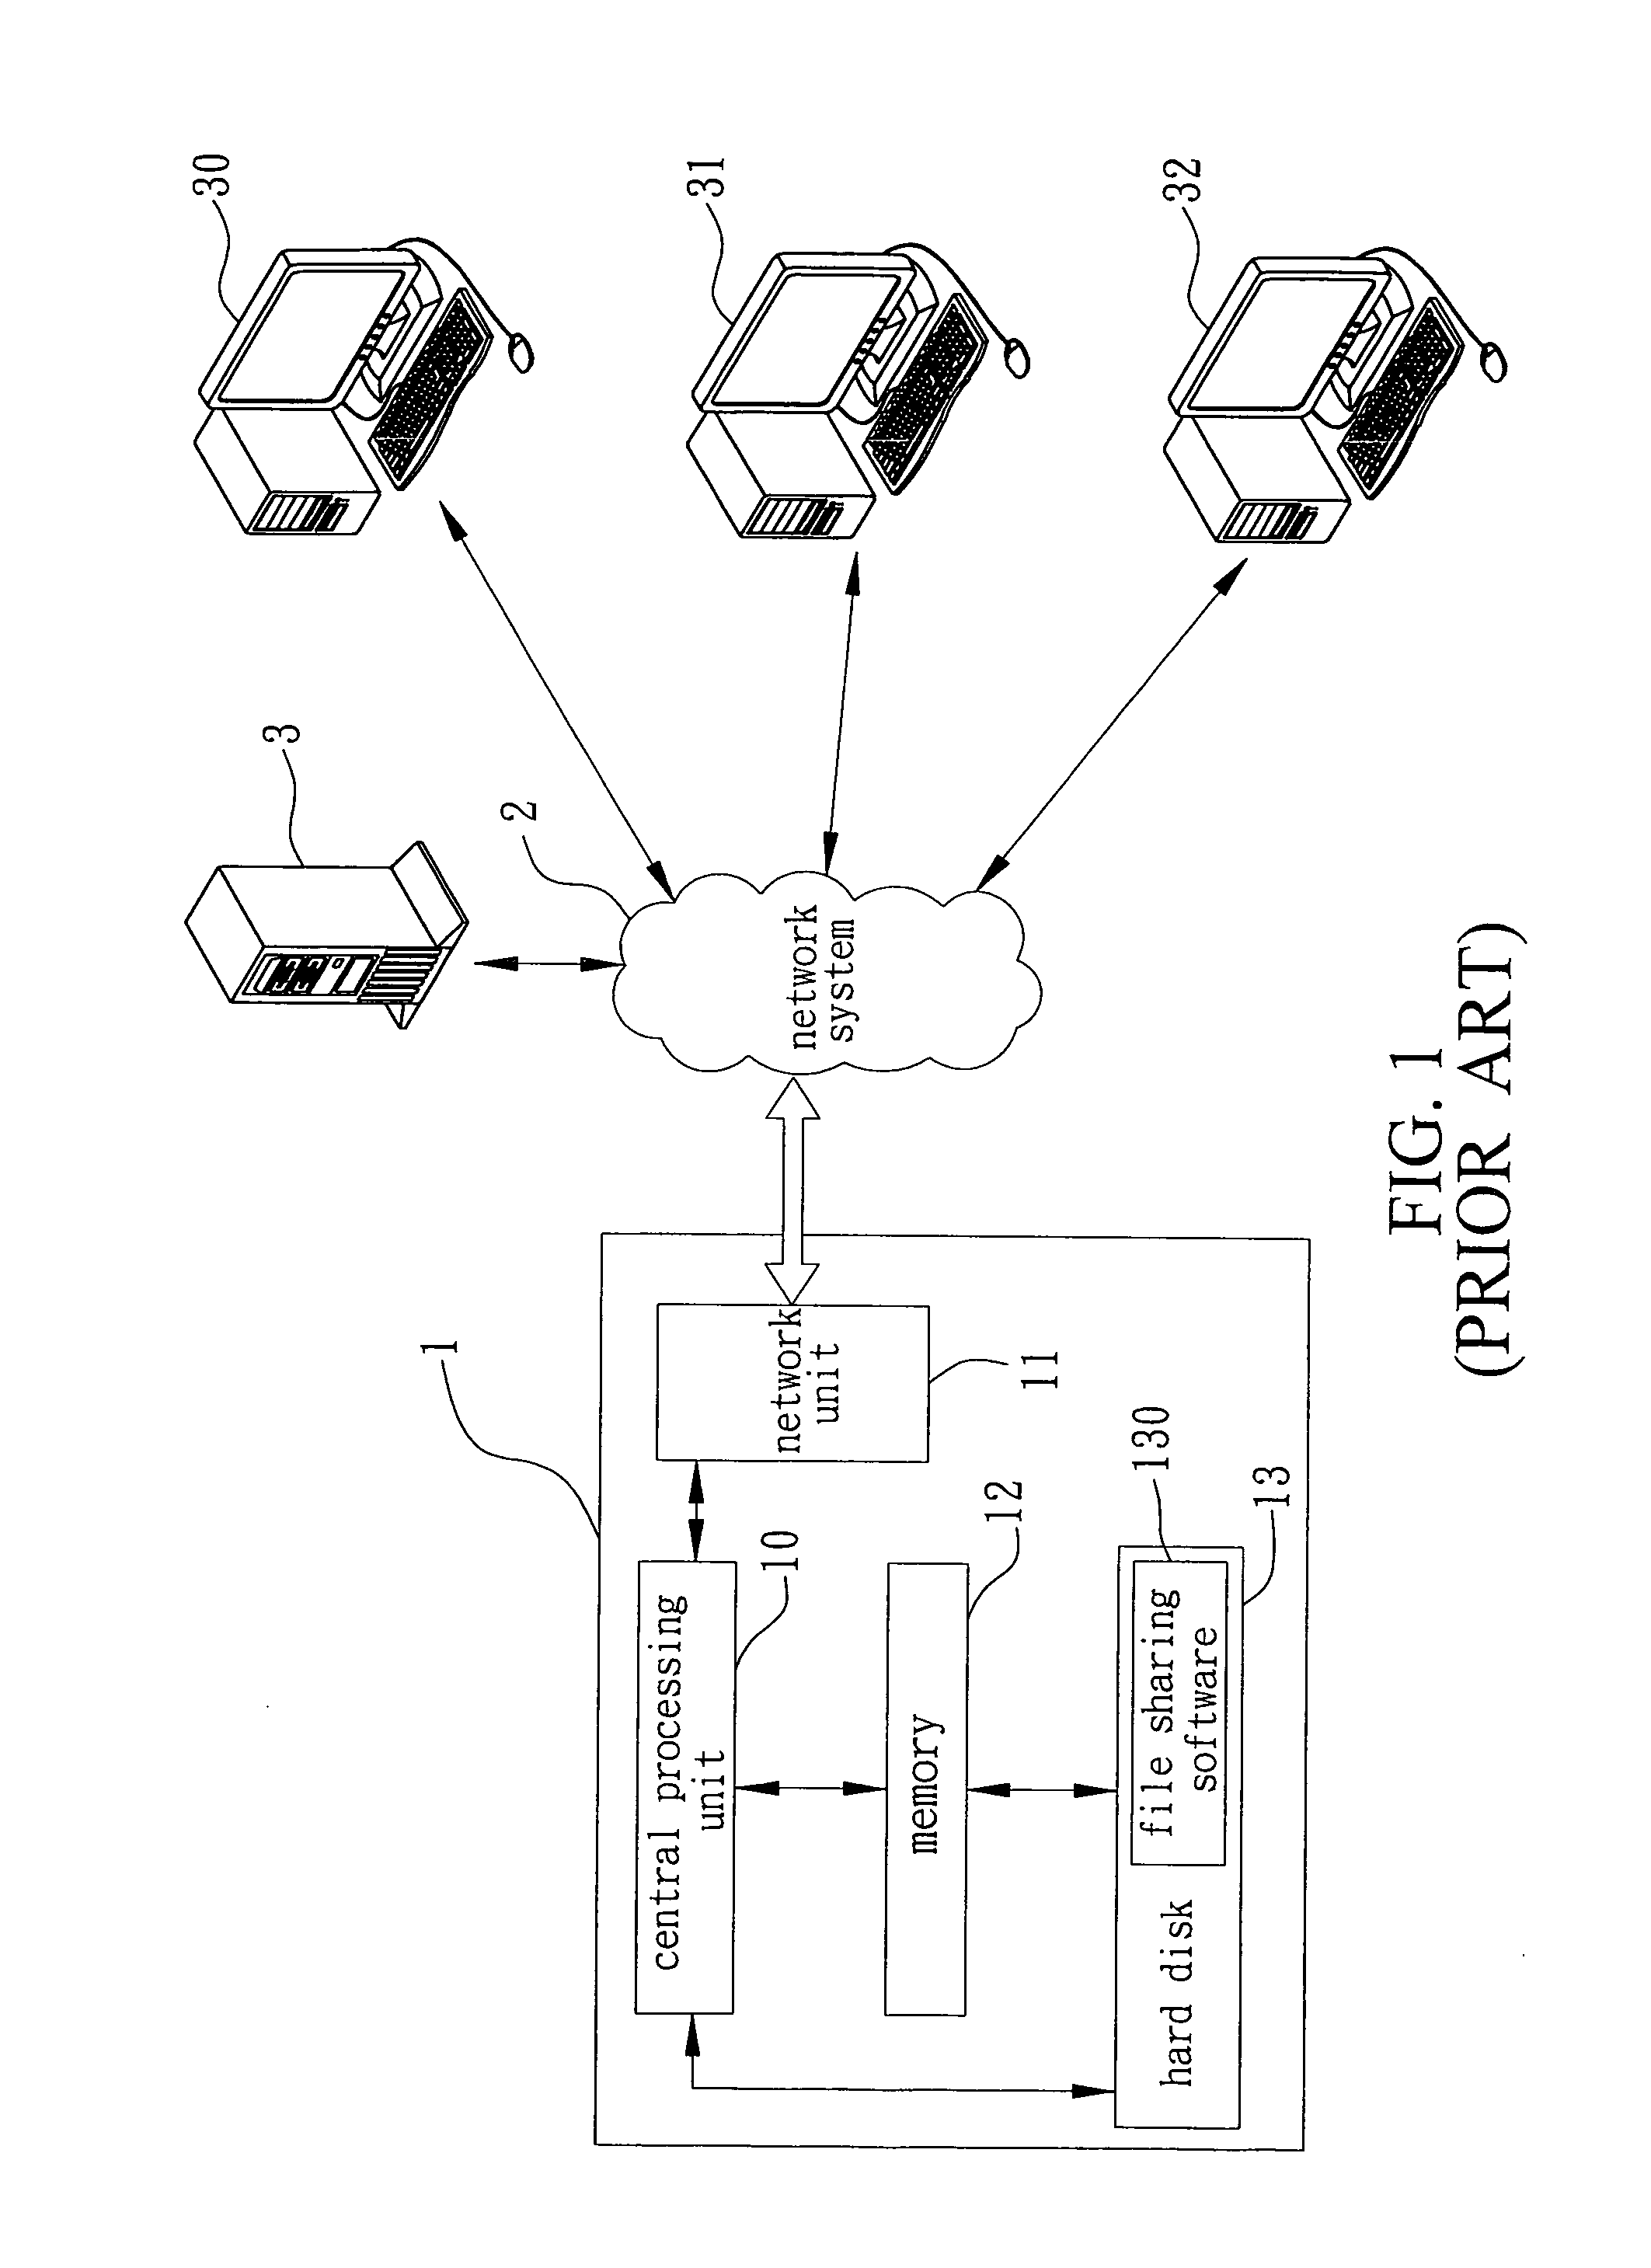 Data write/read auxiliary device and method for writing/reading data